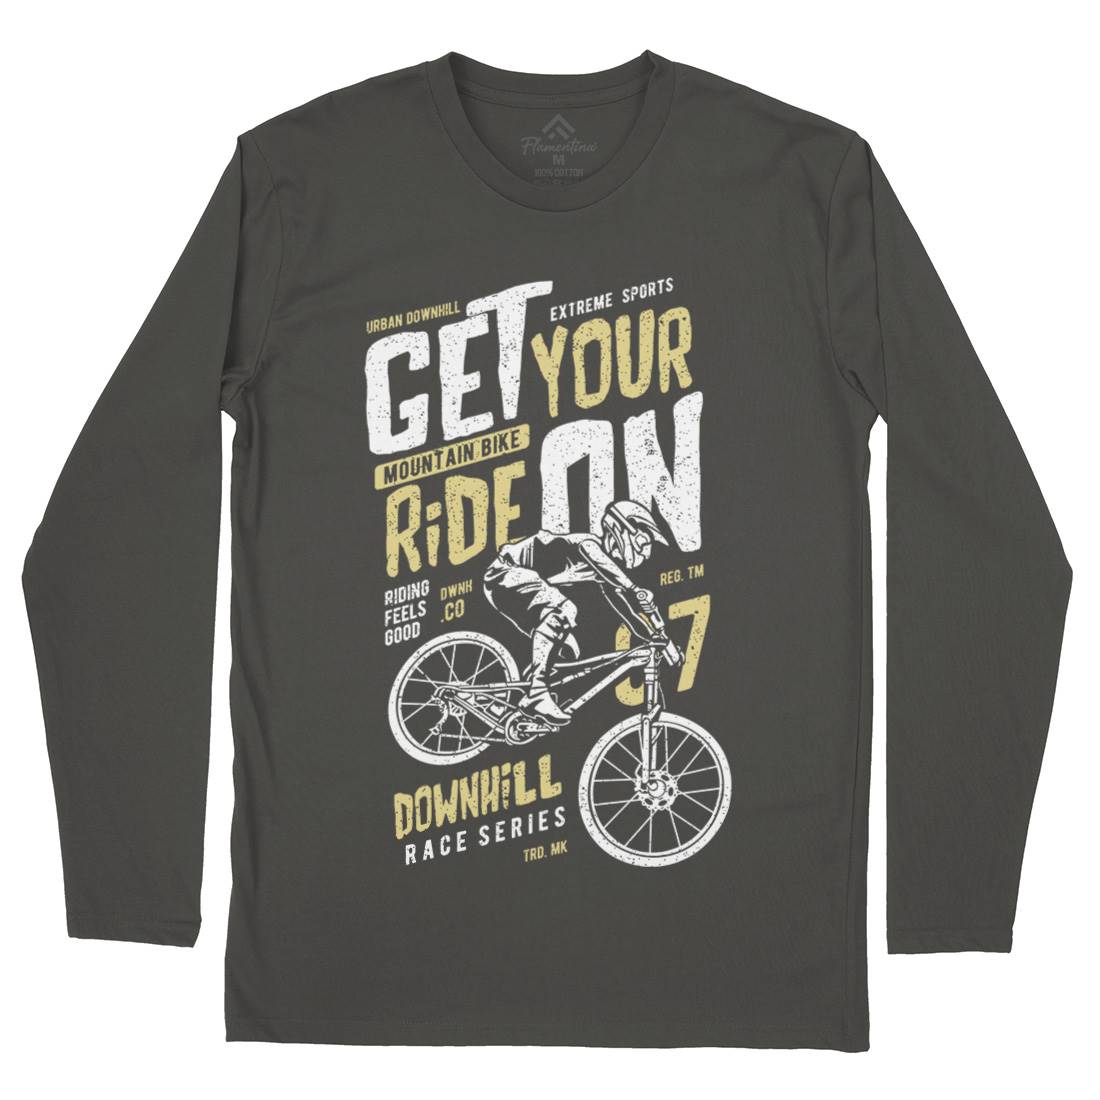 Get Your Ride Mens Long Sleeve T-Shirt Bikes A673